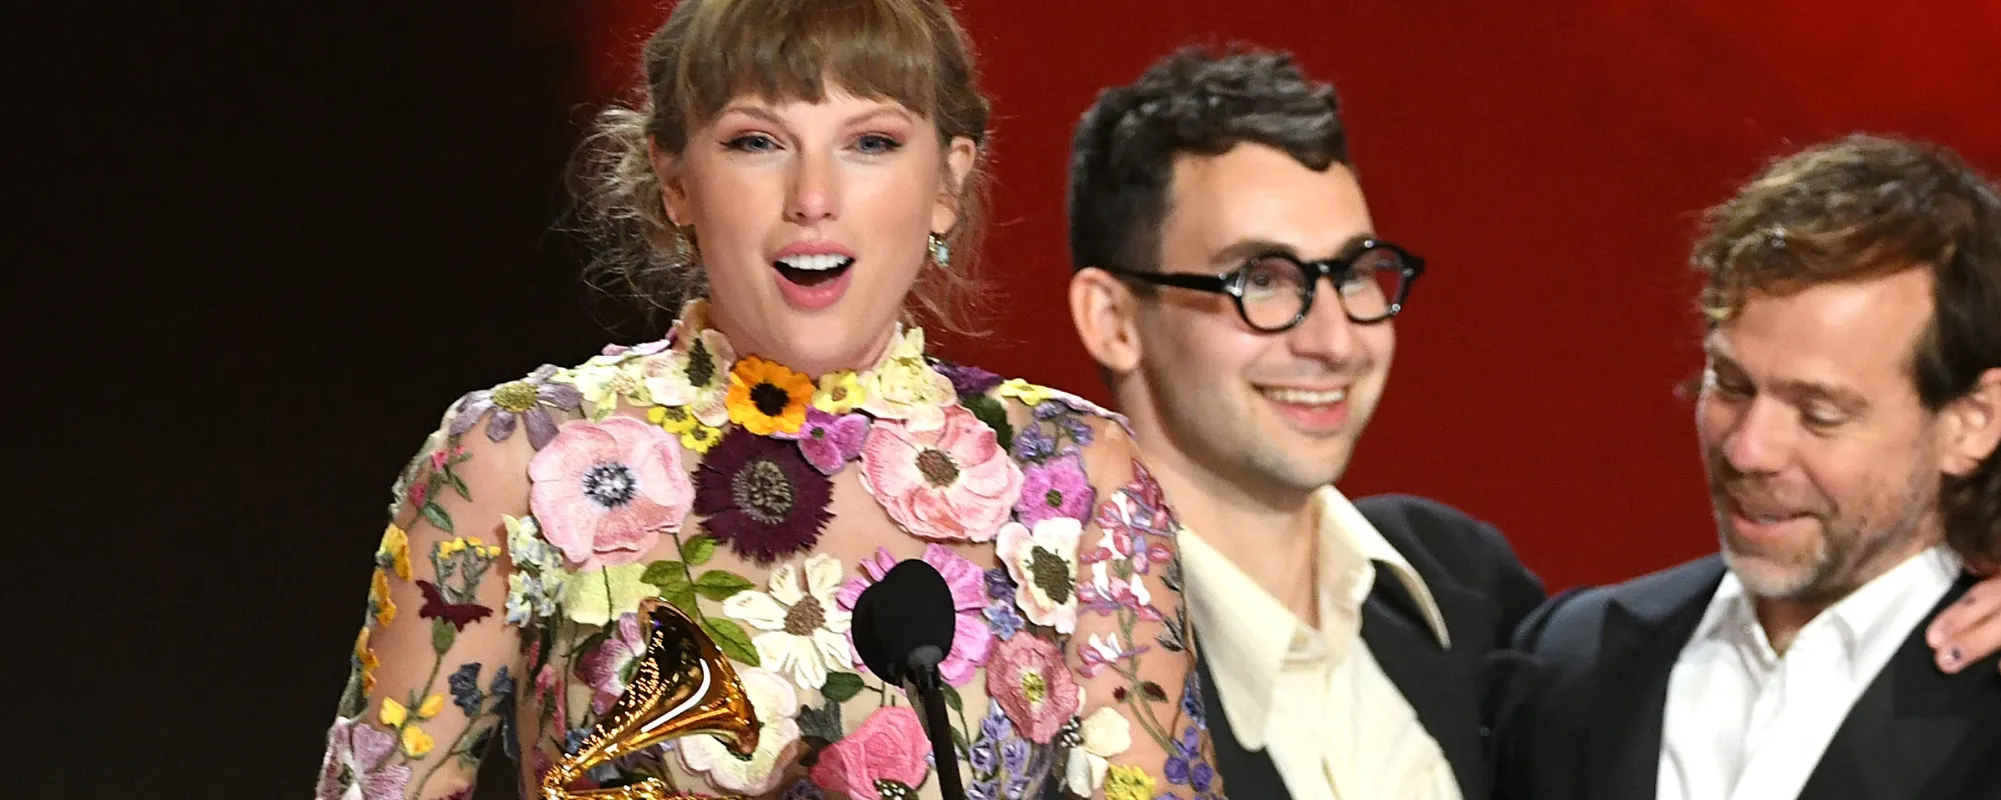 Jack Antonoff Abruptly Ends Interview Over Taylor Swift Clickbait